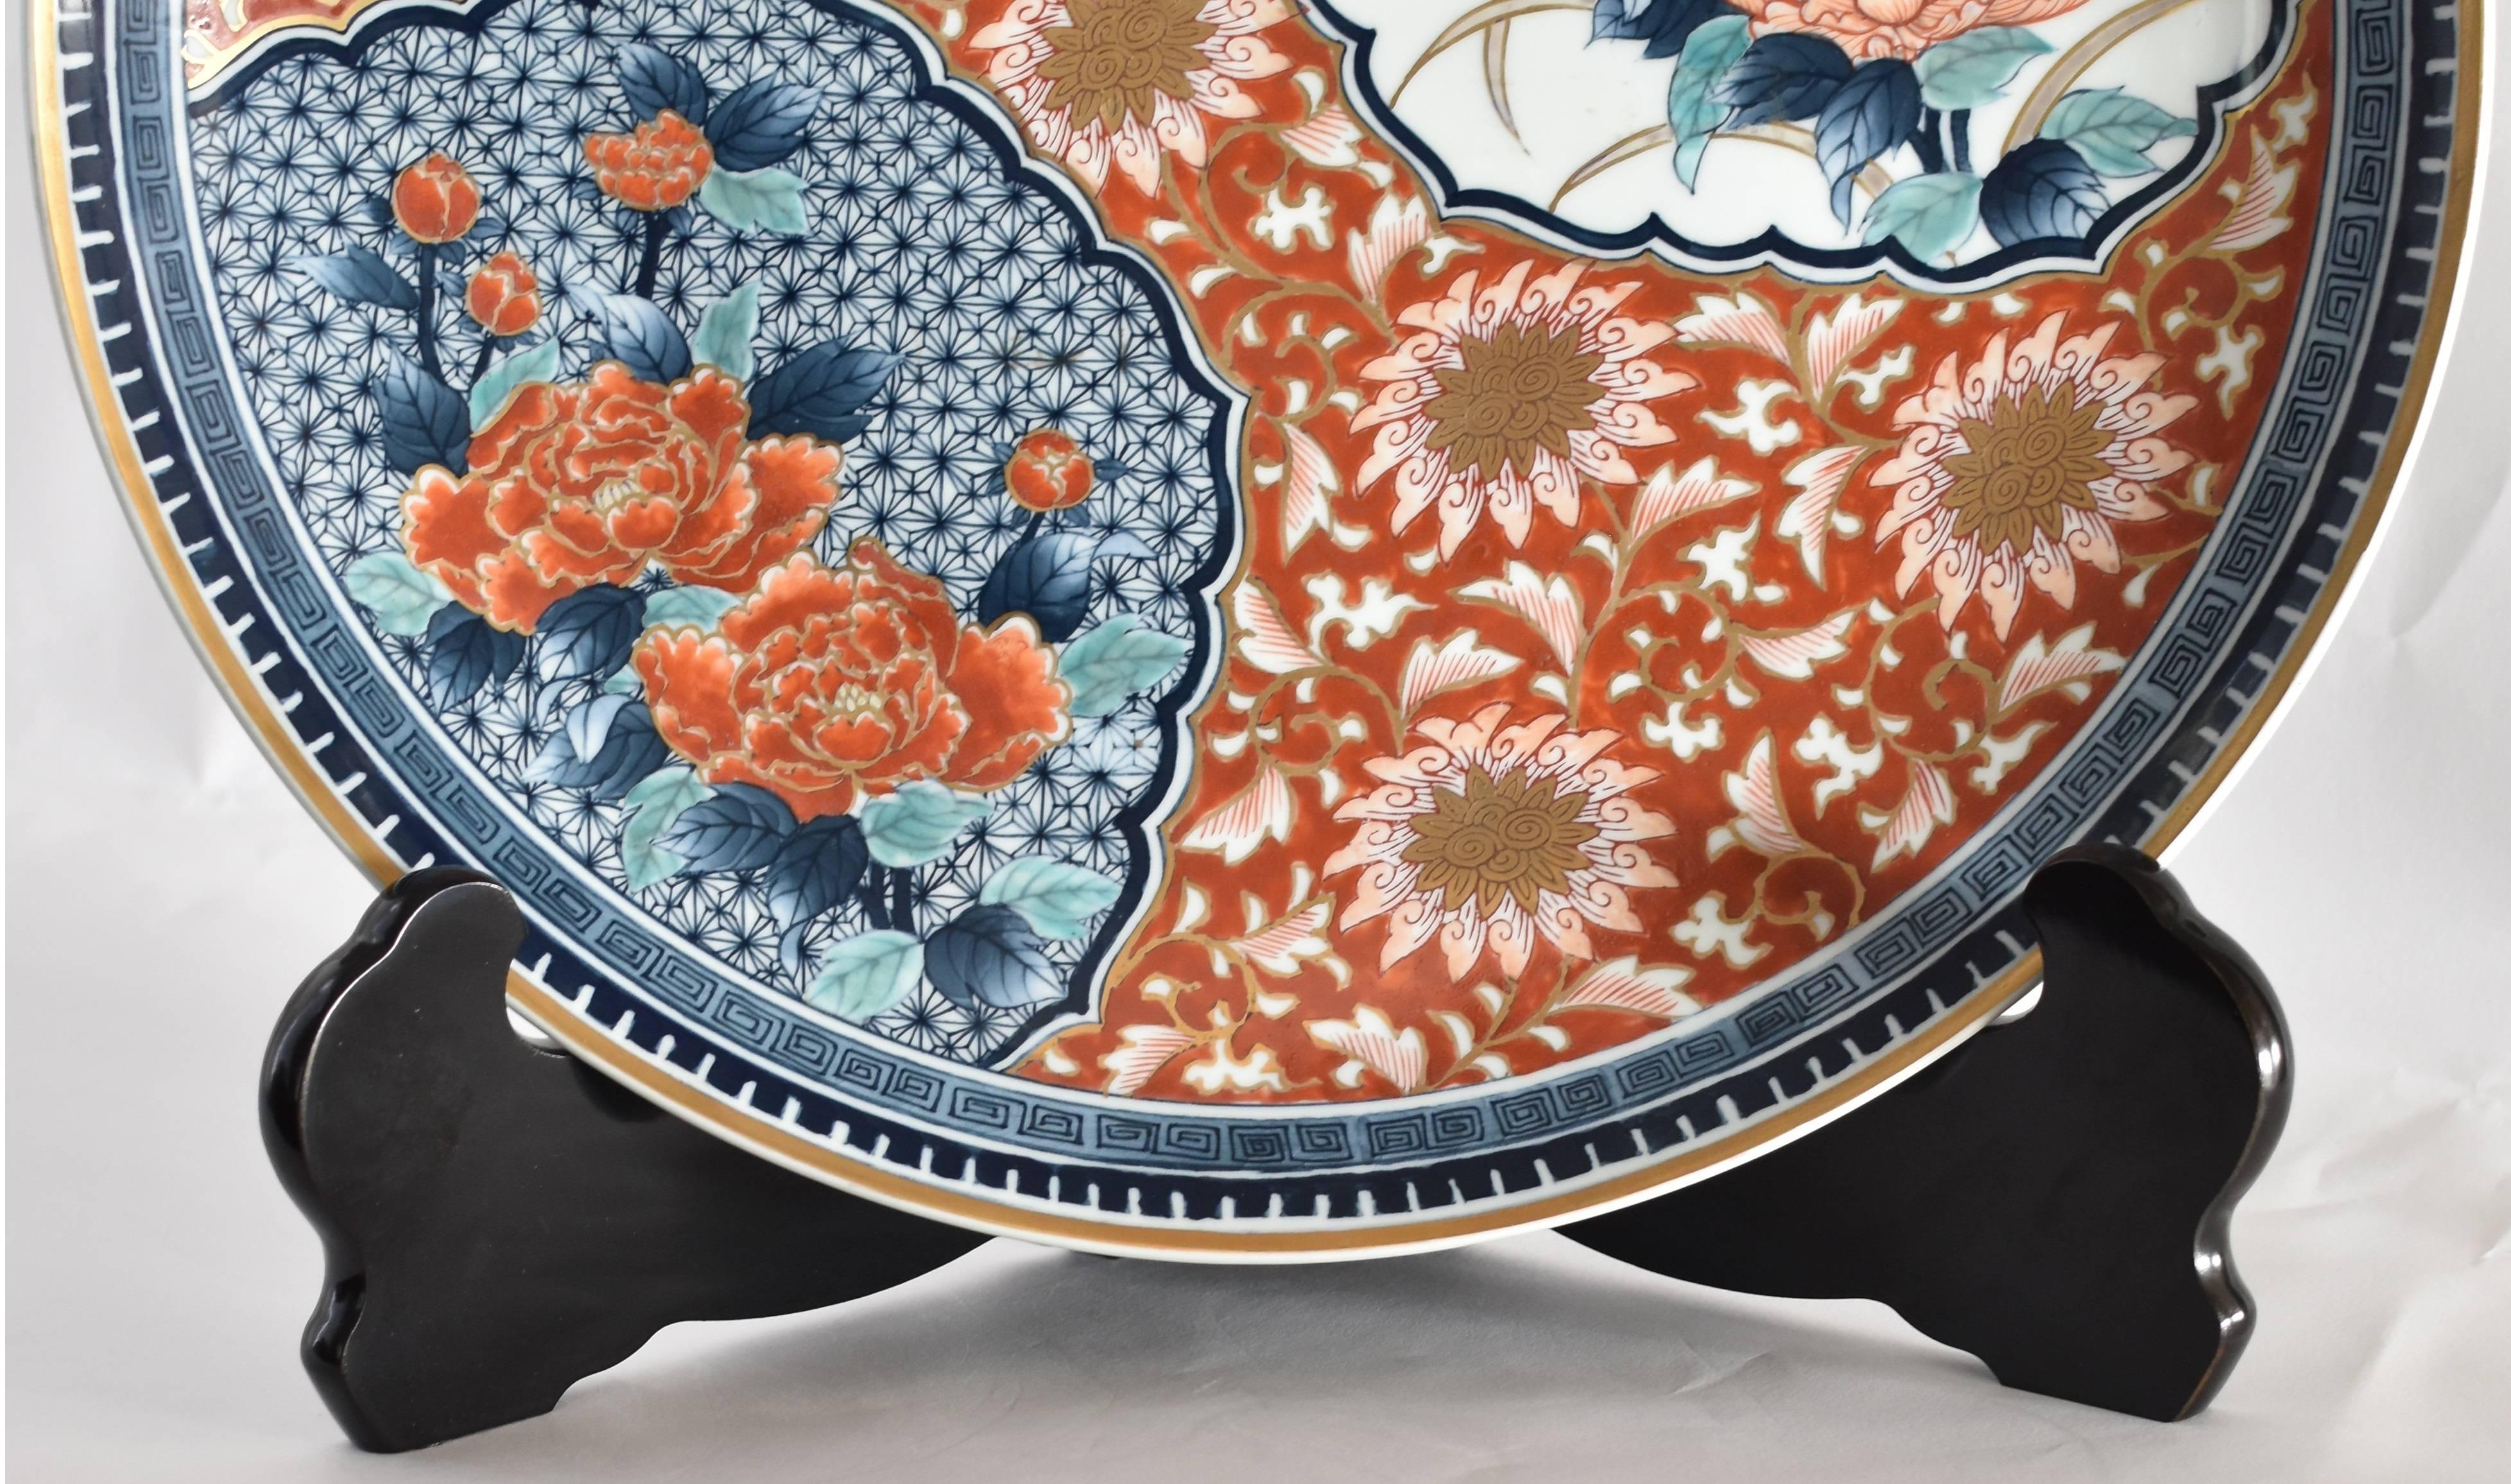 This large Japanese porcelain charger is crafted and hand-painted in the Imari-Arita region of southern Japan and is signed by Tadamine.

The asymmetric layout features two scalloped panels with peonies in full bloom. One panel depicts two peonies